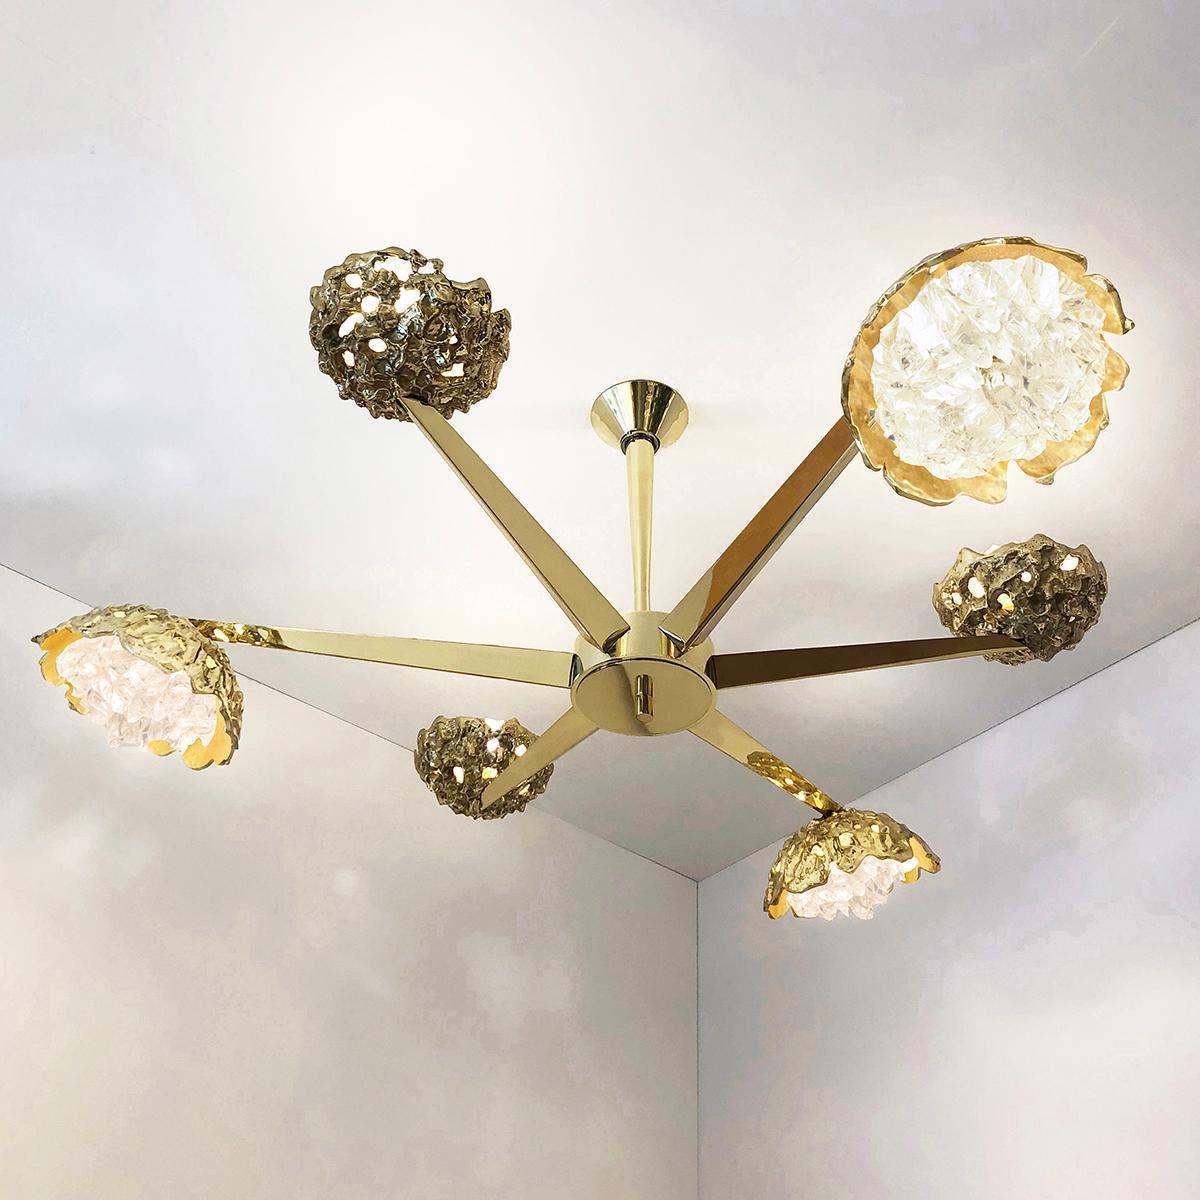 The Fusione ceiling fixture highlights the contrast between organic forms and sleek geometric lines; Cast brass shades with irregular glass crystals sprout from polished V shaped arms. The first images show the fixture in our polished brass